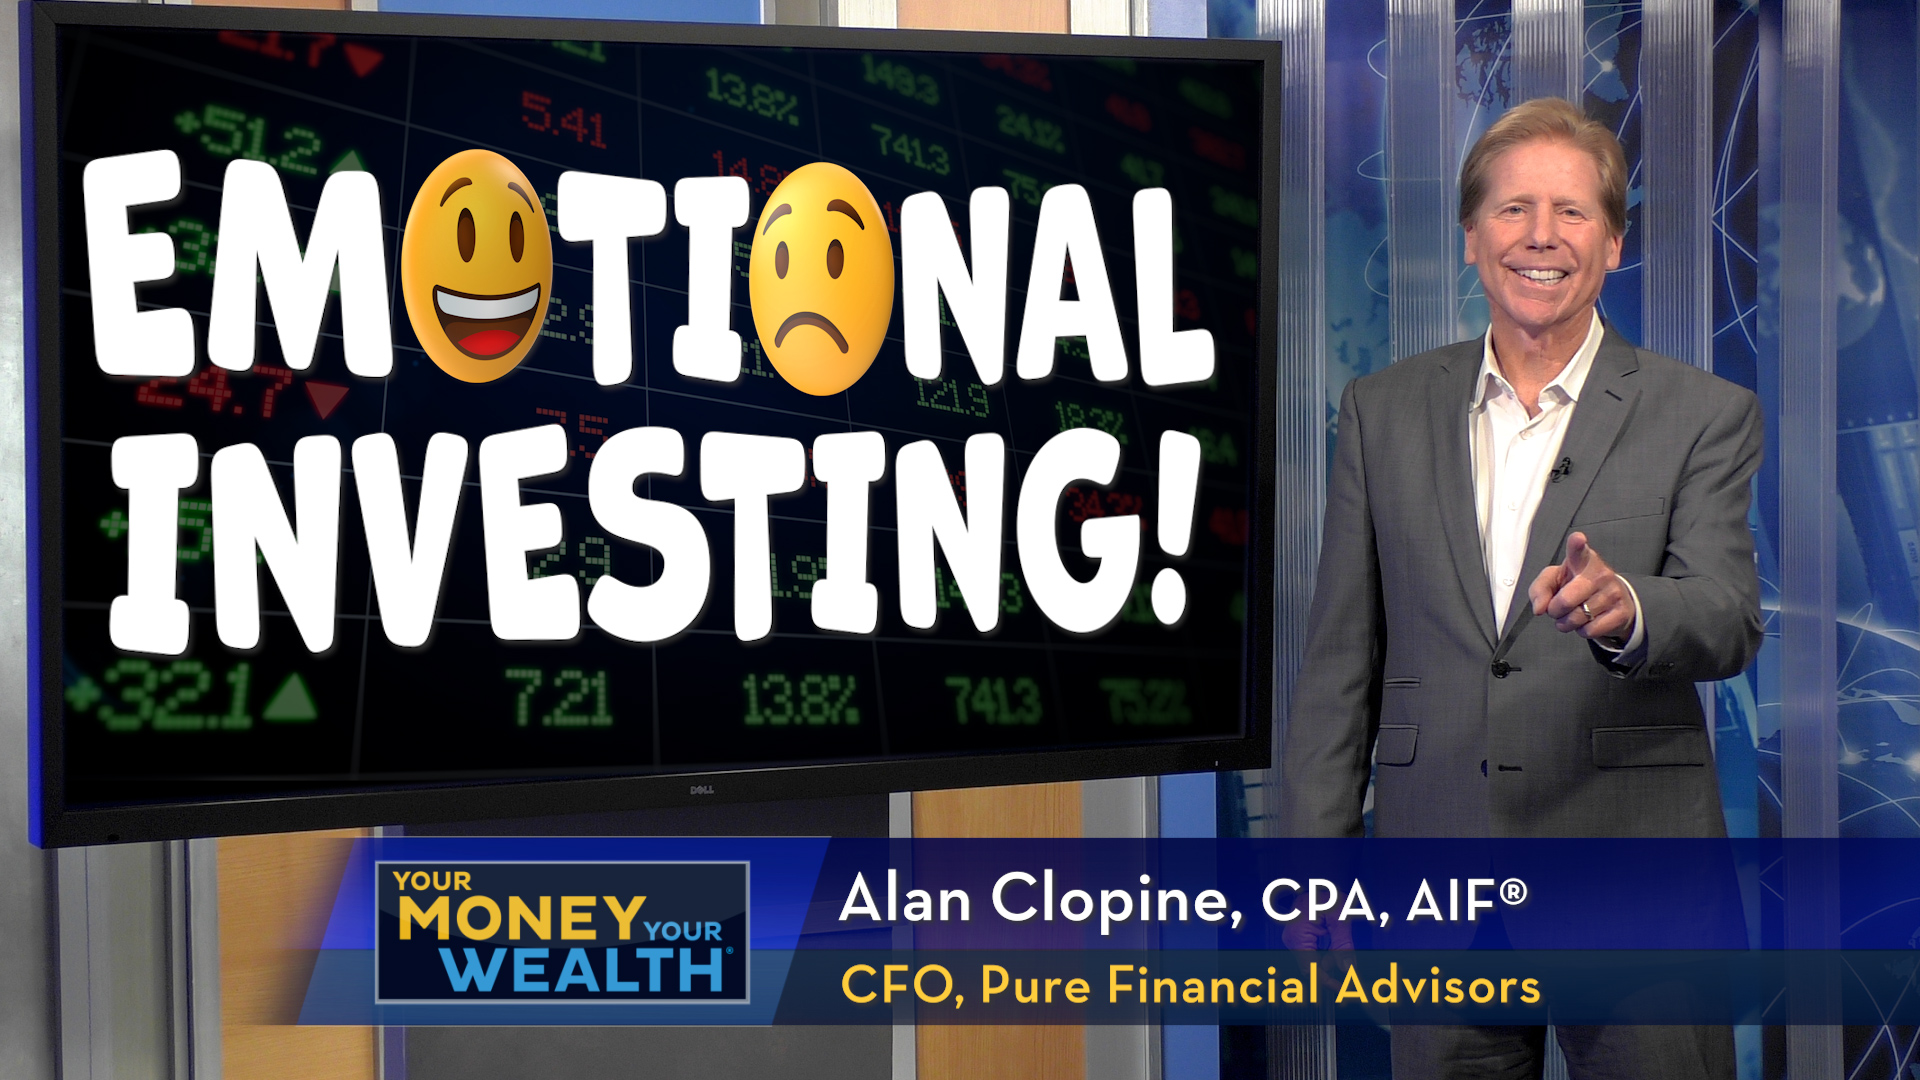 Emotional Investing: You Are Your Own Worst Enemy! - Your Money, Your Wealth® TV - S9 | E6